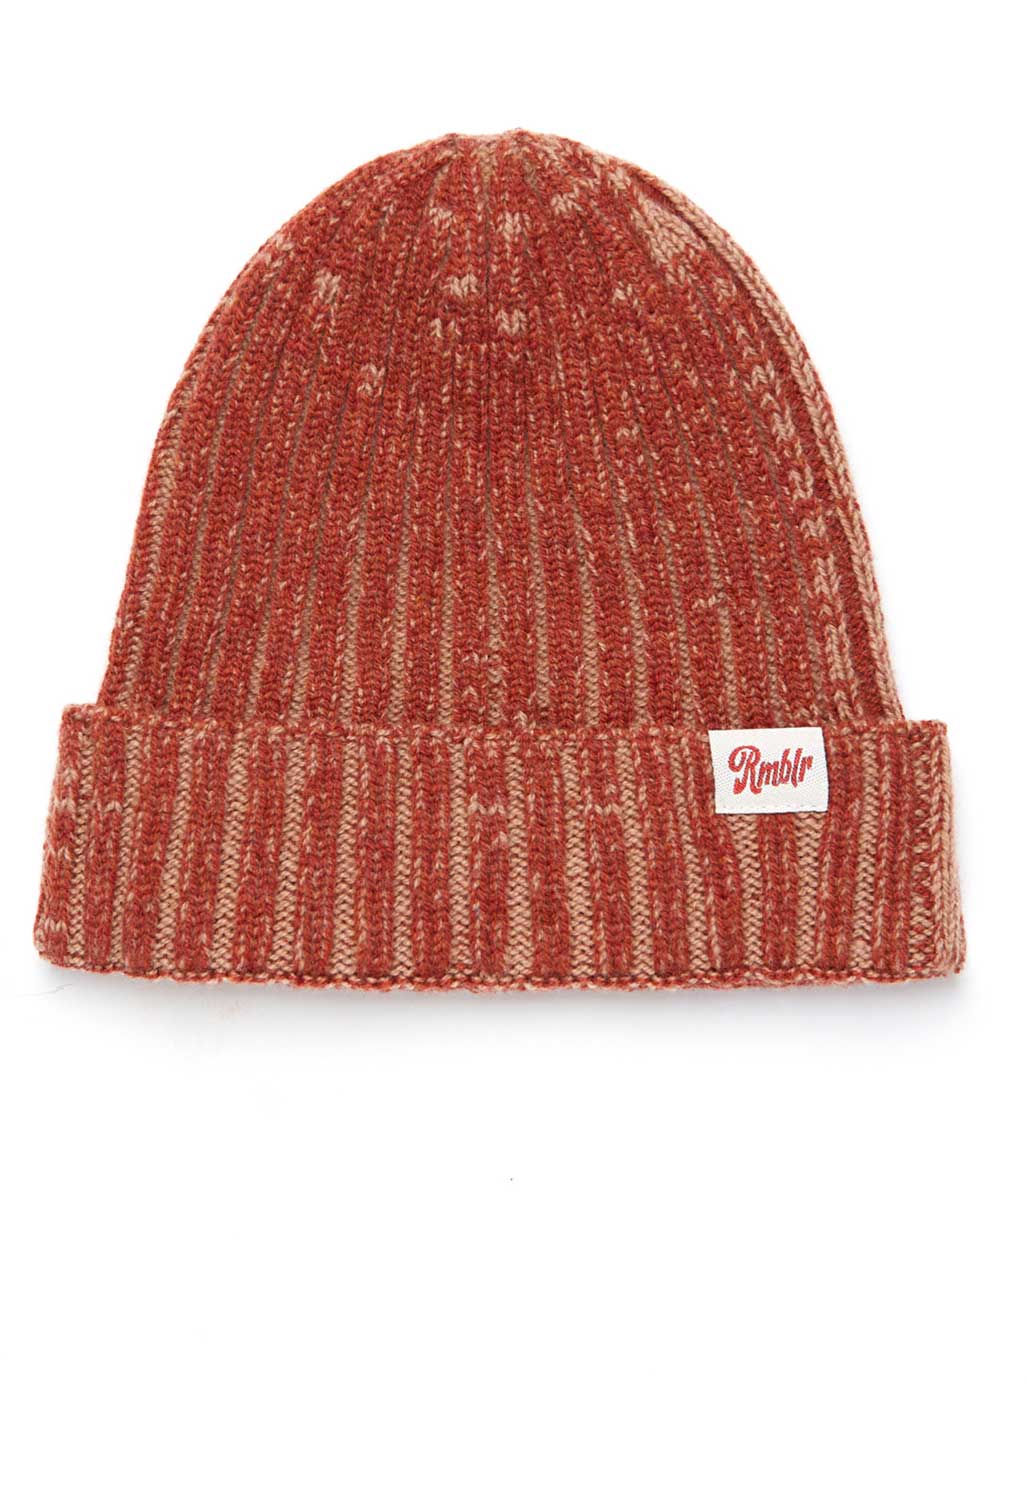 Product image of RMBLR Three Shires Beanie